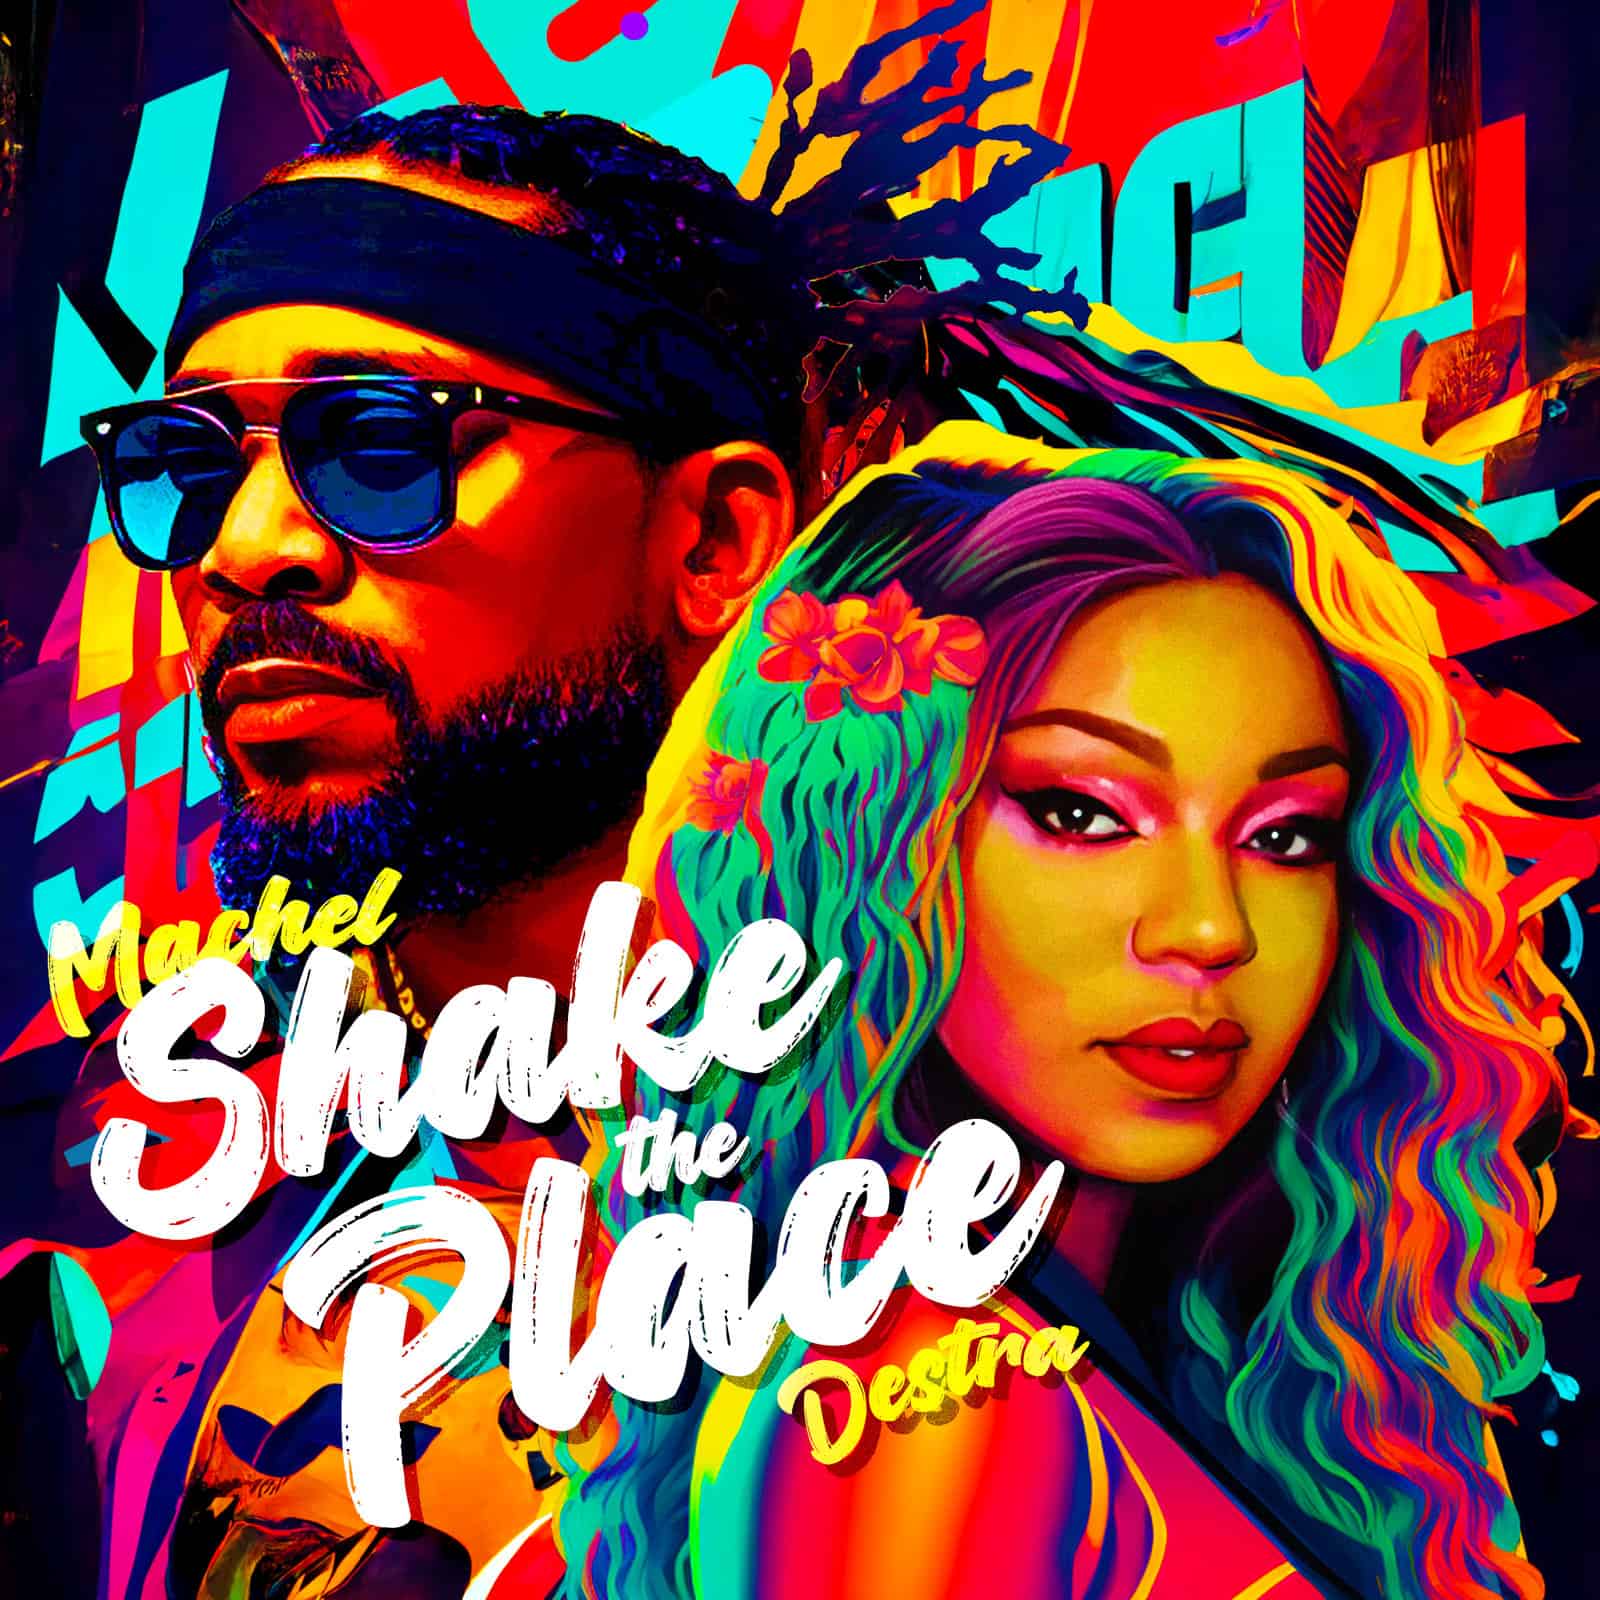 Machel & Destra send soca fans in a frenzy with ‘Shake The Place’